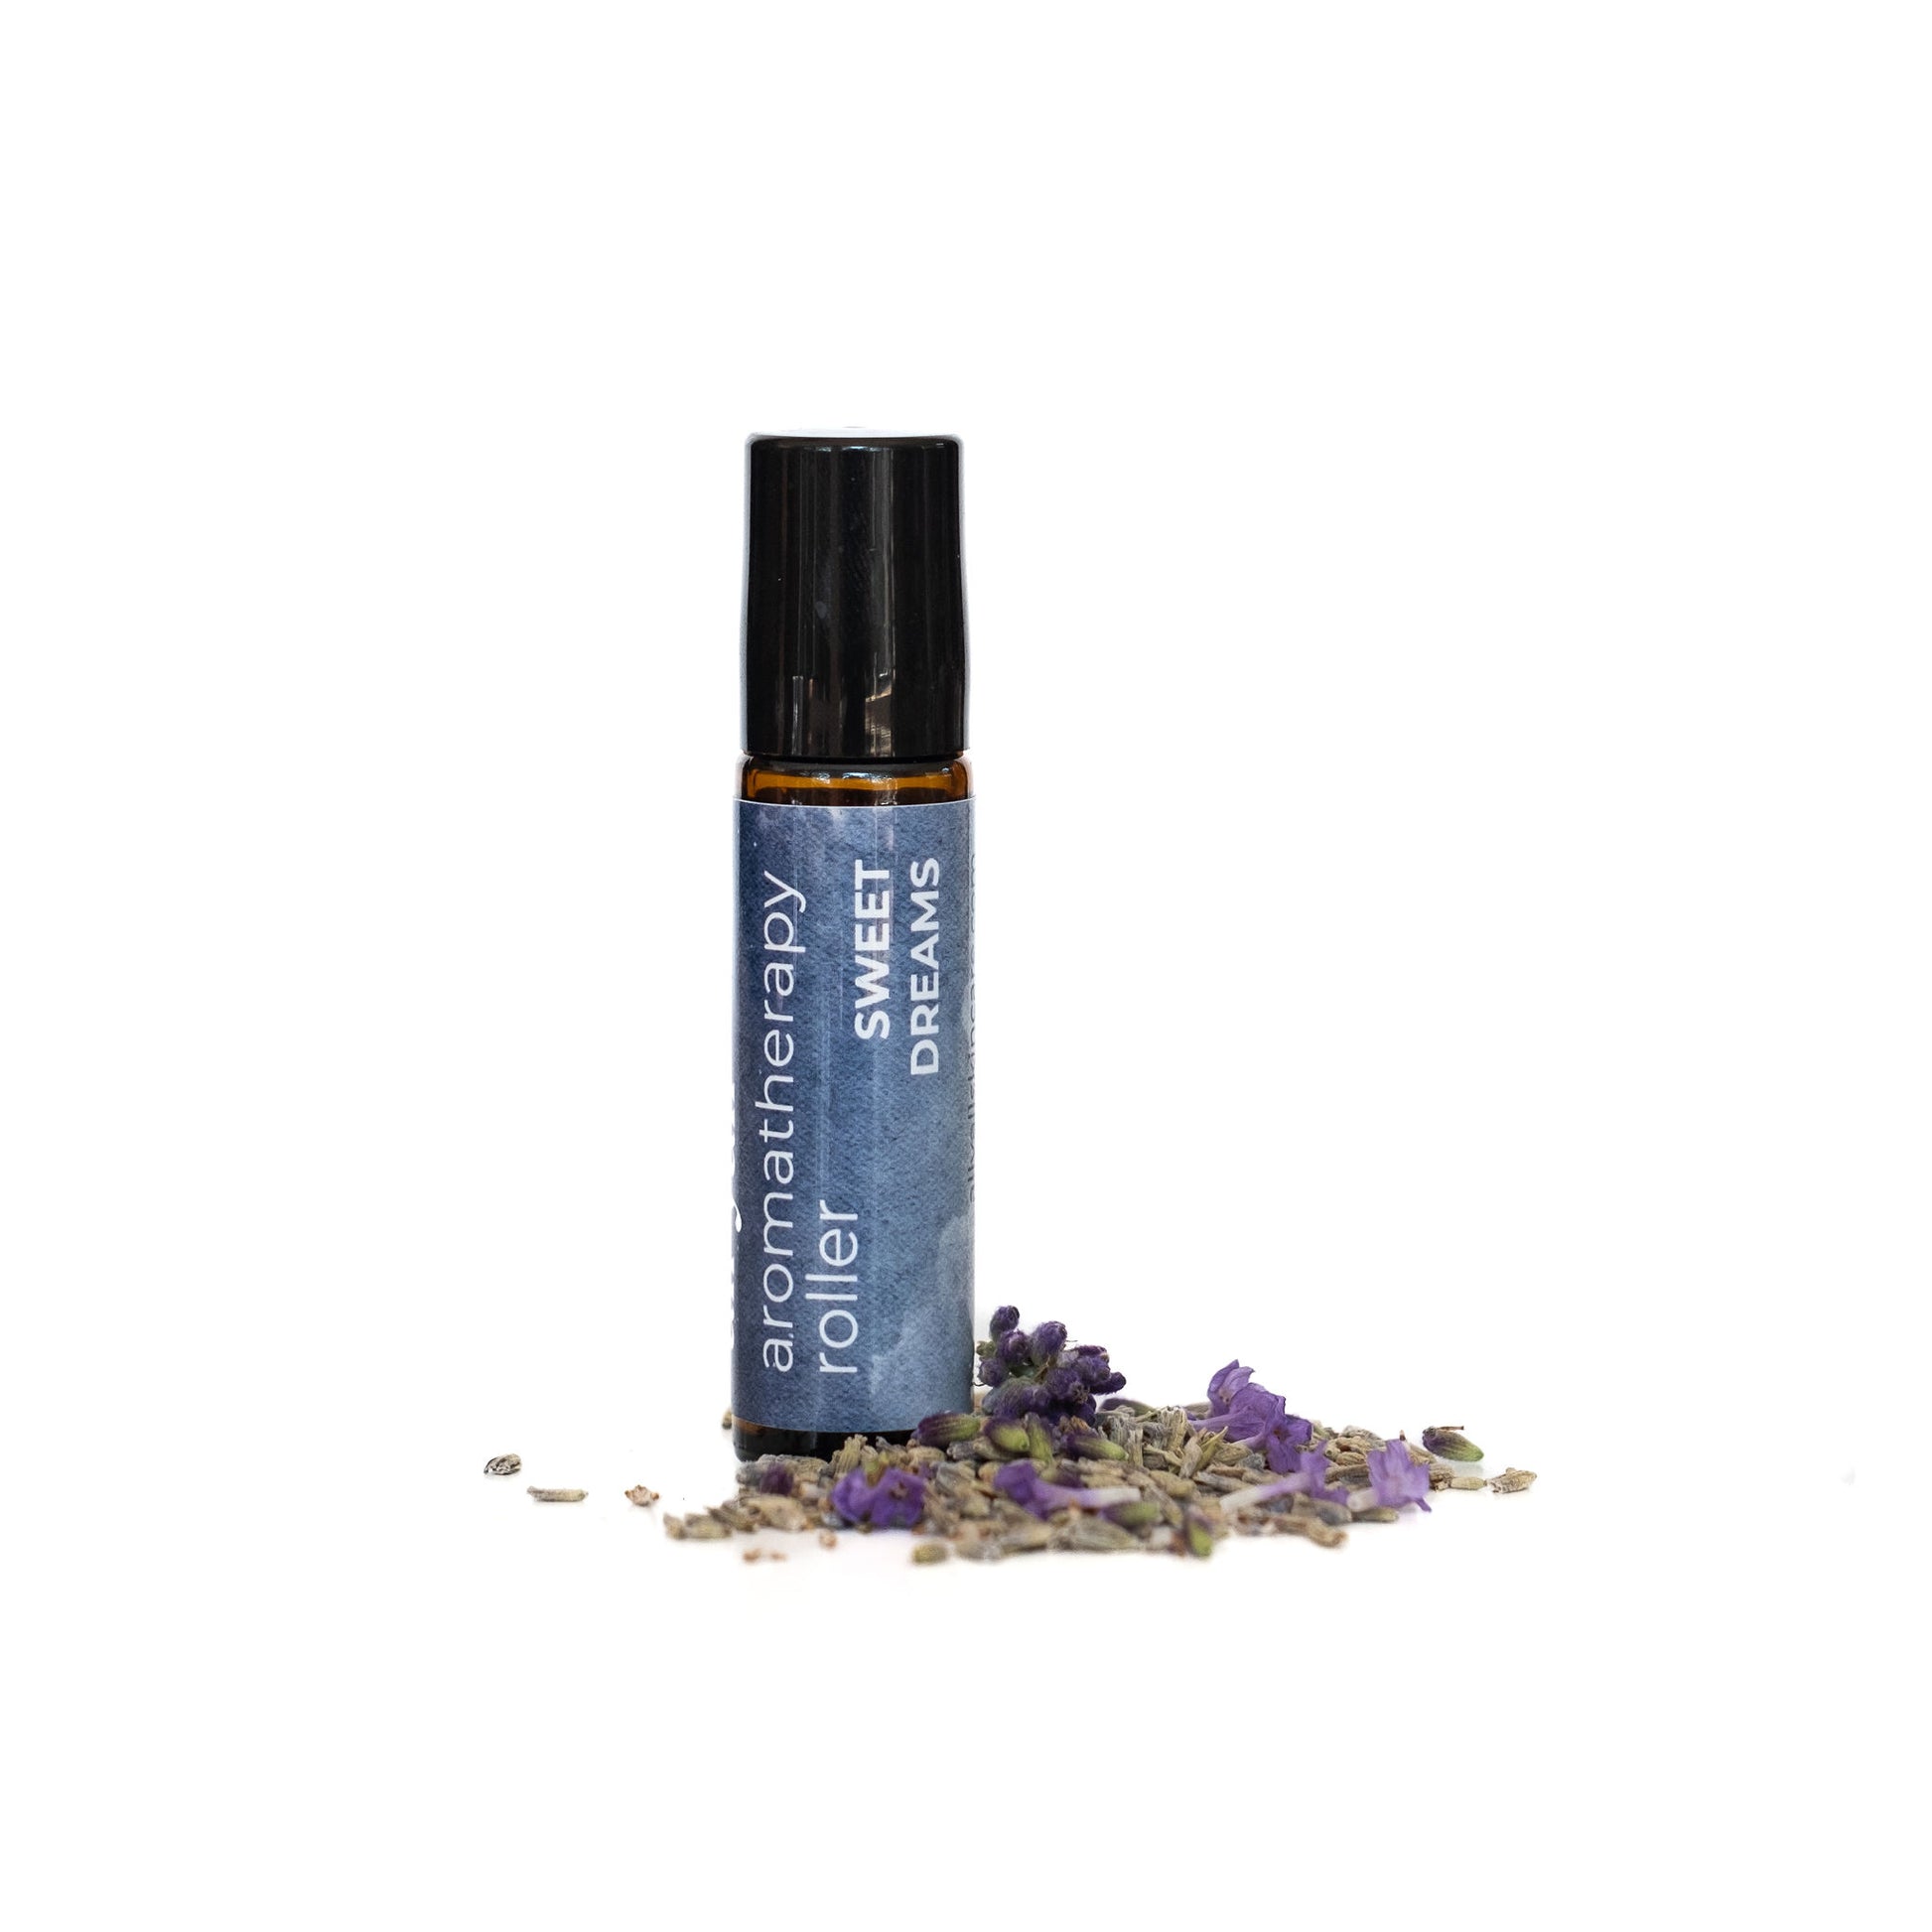 Let your senses aid you to sleep with this Sweet Dreams aromatherapy roller | All Y'all Skincare